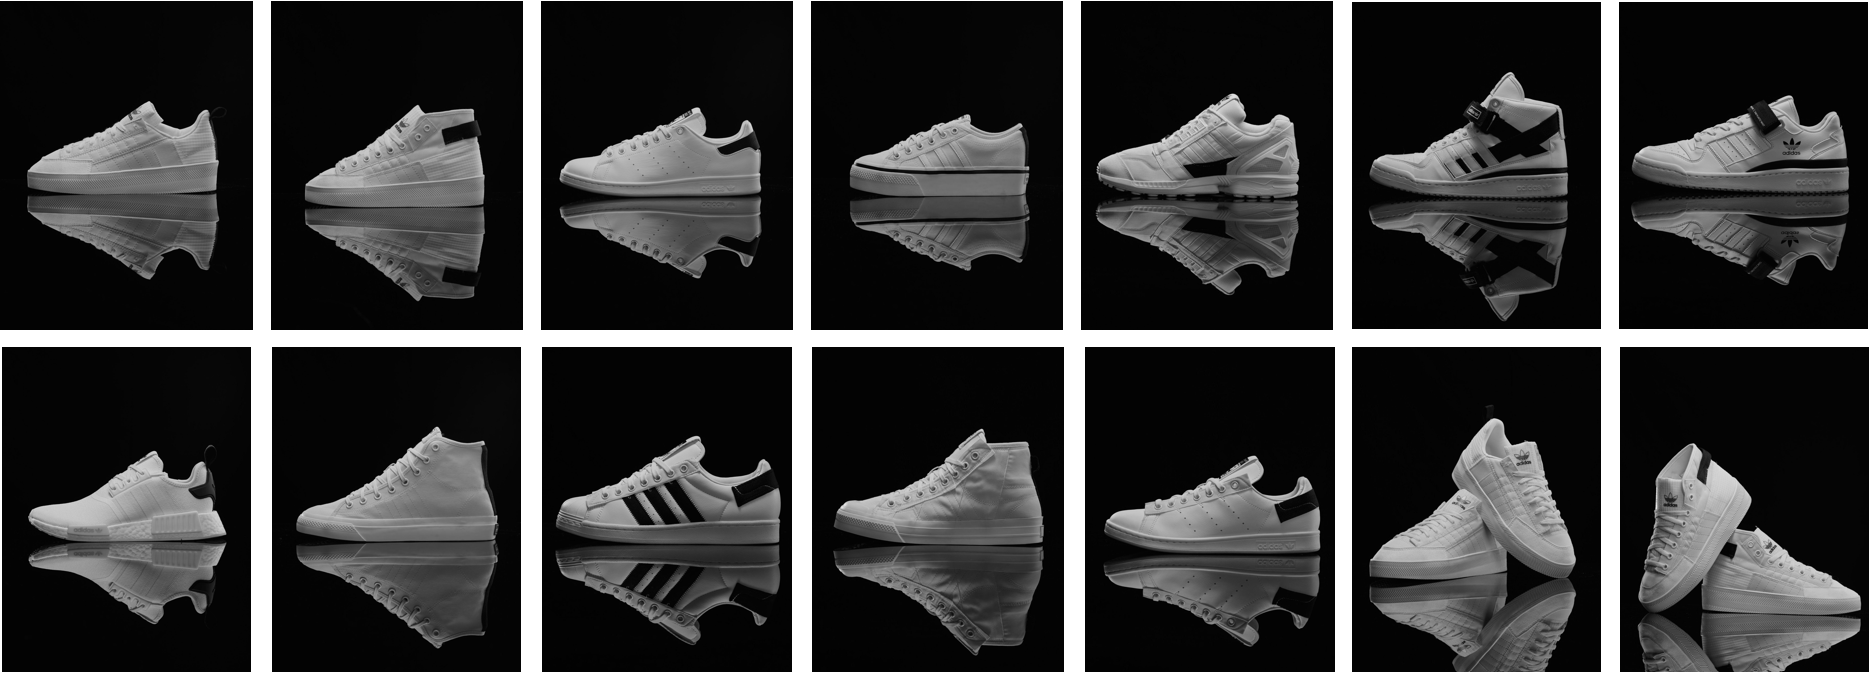 adidas Originals and Parley Present: Today’s Icons, Made for Tomorrow